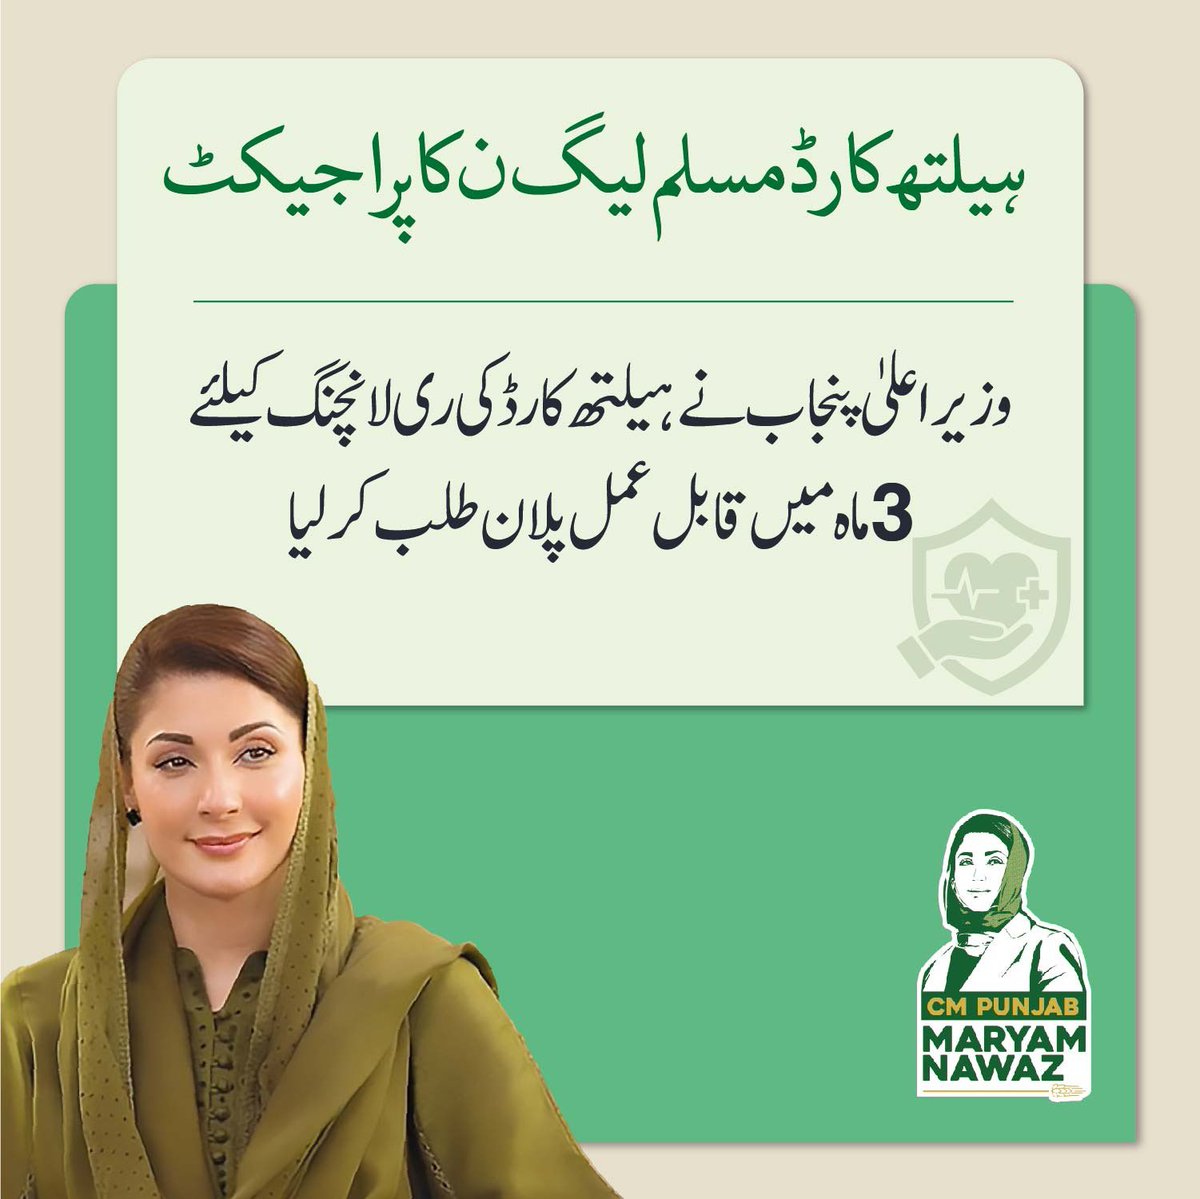 Health Card is PML-N's Project! The Chief Minister of Punjab has asked for a feasible plan within three months for the relaunch of the health card program.